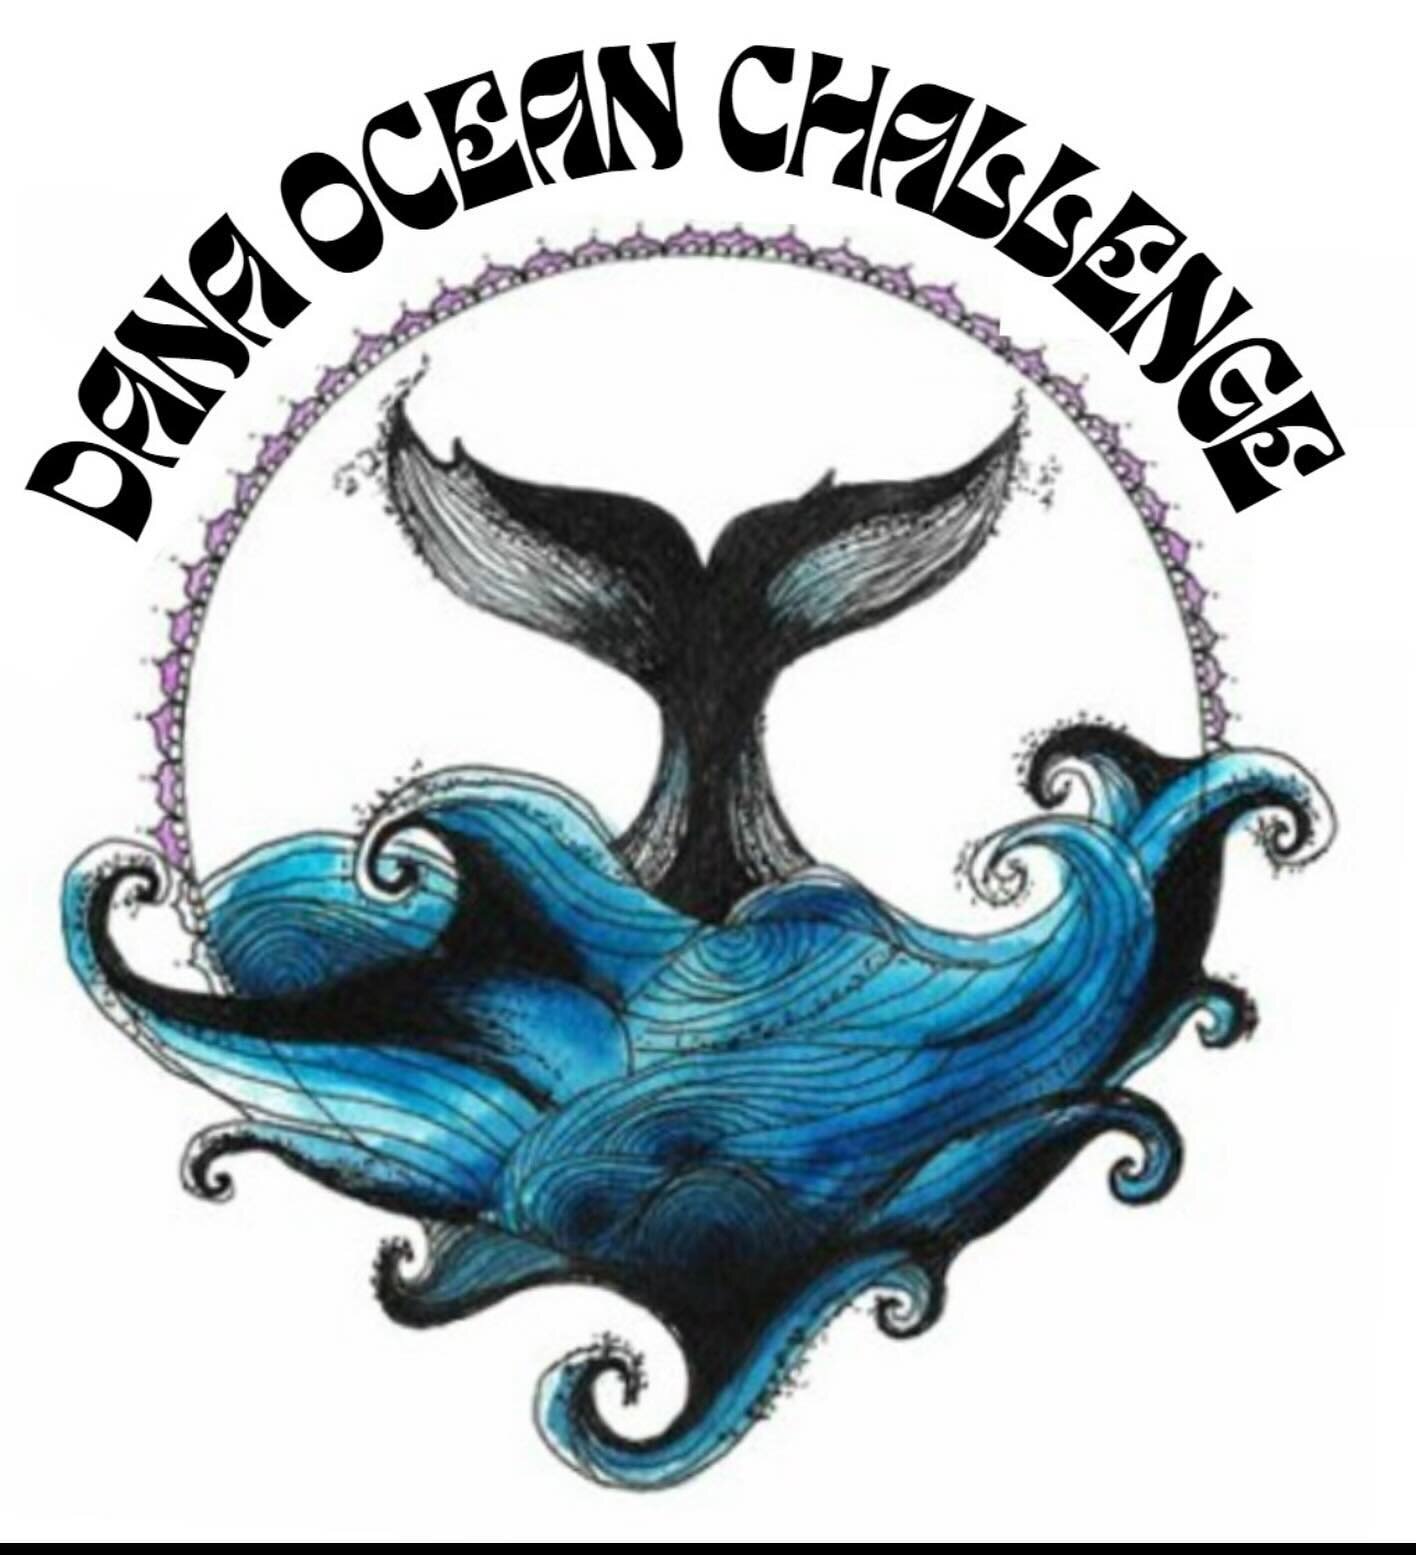 30 day count down to the ocean challenge!
We have some exciting sponsors this year that we are stoked to partner with! Our sponsors will be there on race day so please show them some Aloha! More Information to follow! #outrigger
#SUP
#surfskiracing
#